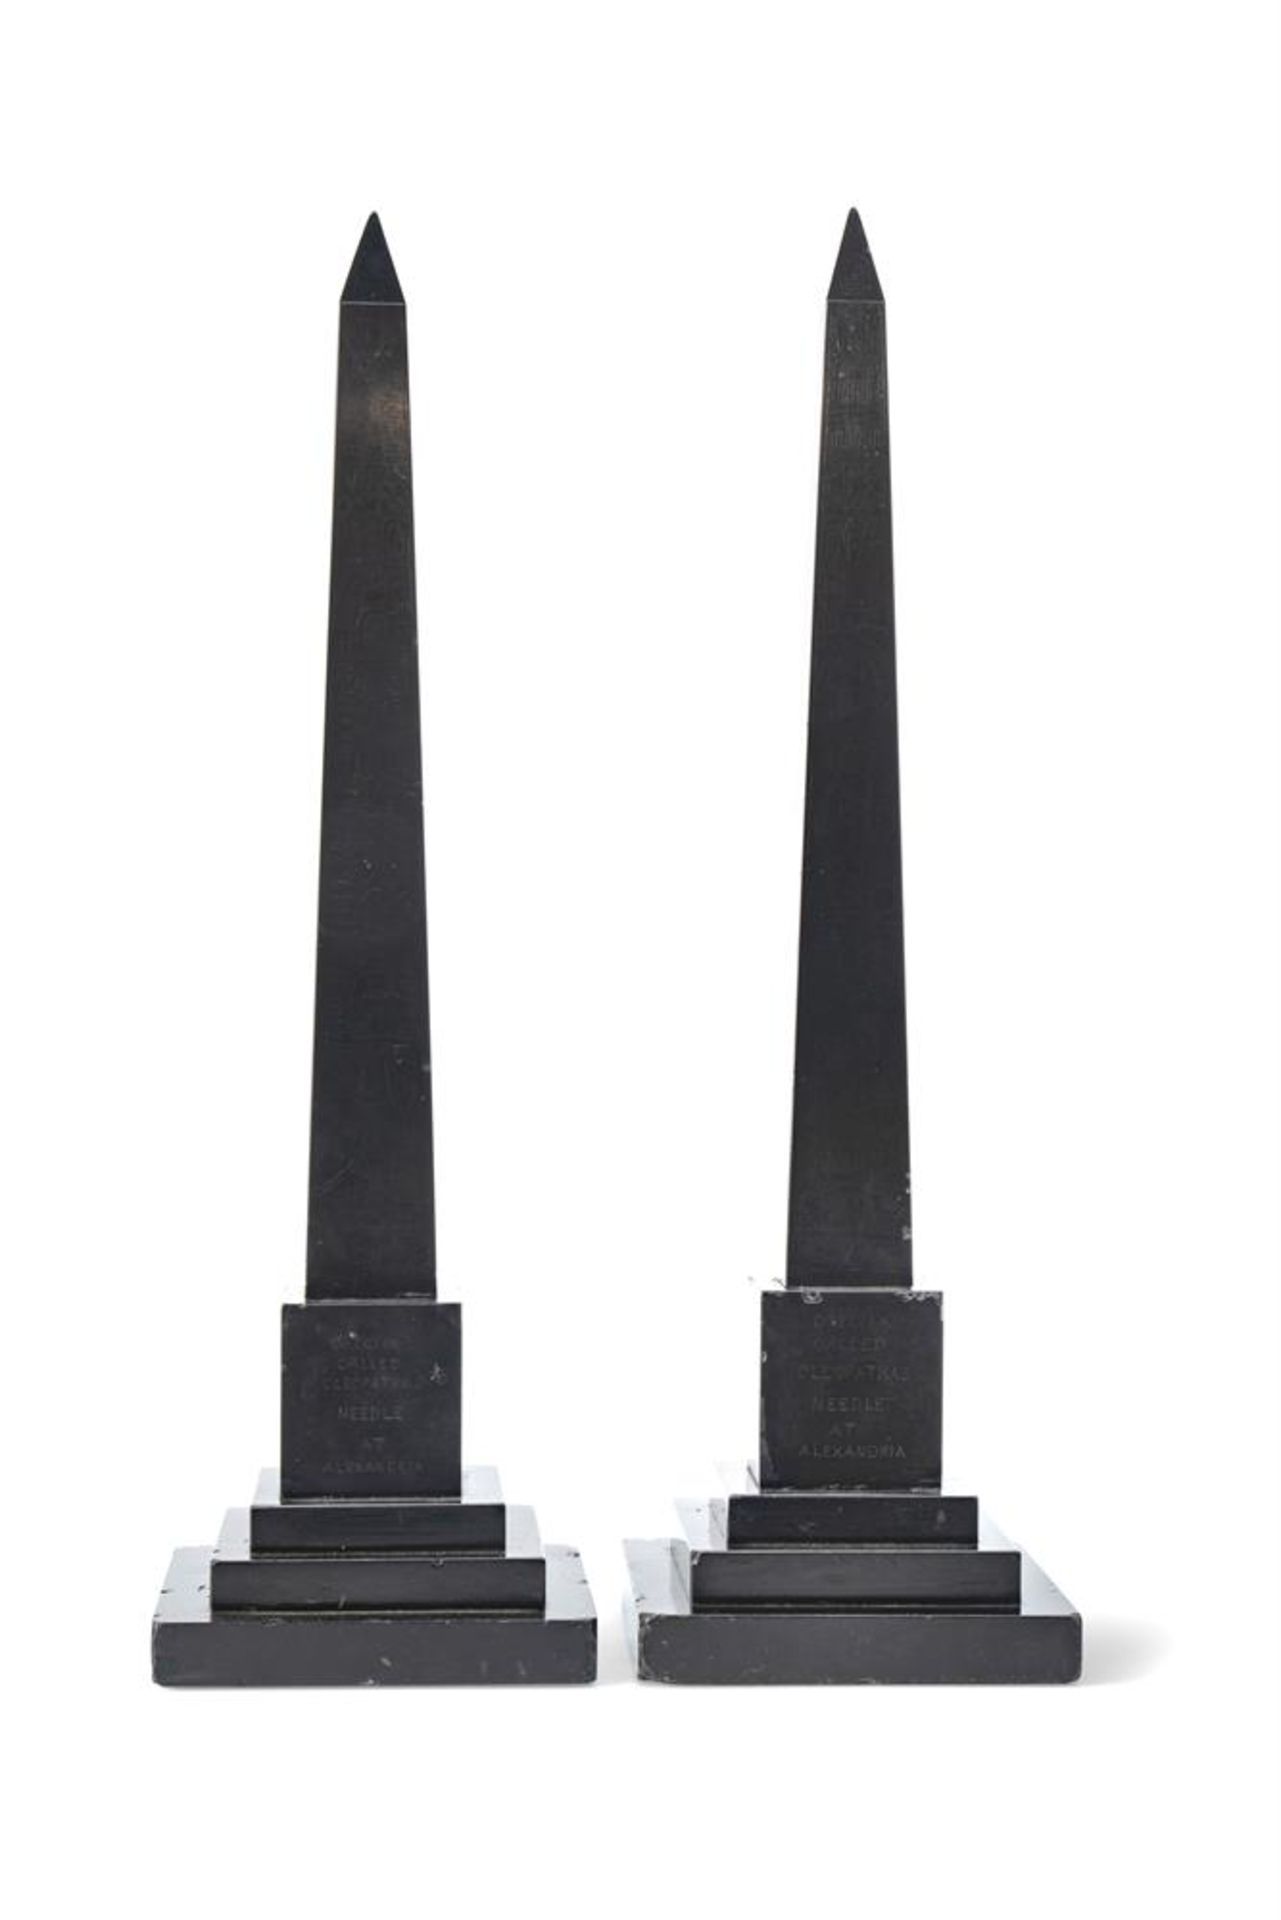 A PAIR OF ASHFORD MARBLE 'CLEOPATRA'S NEEDLE' OBELISKS, MID 19TH CENTURY - Image 2 of 4